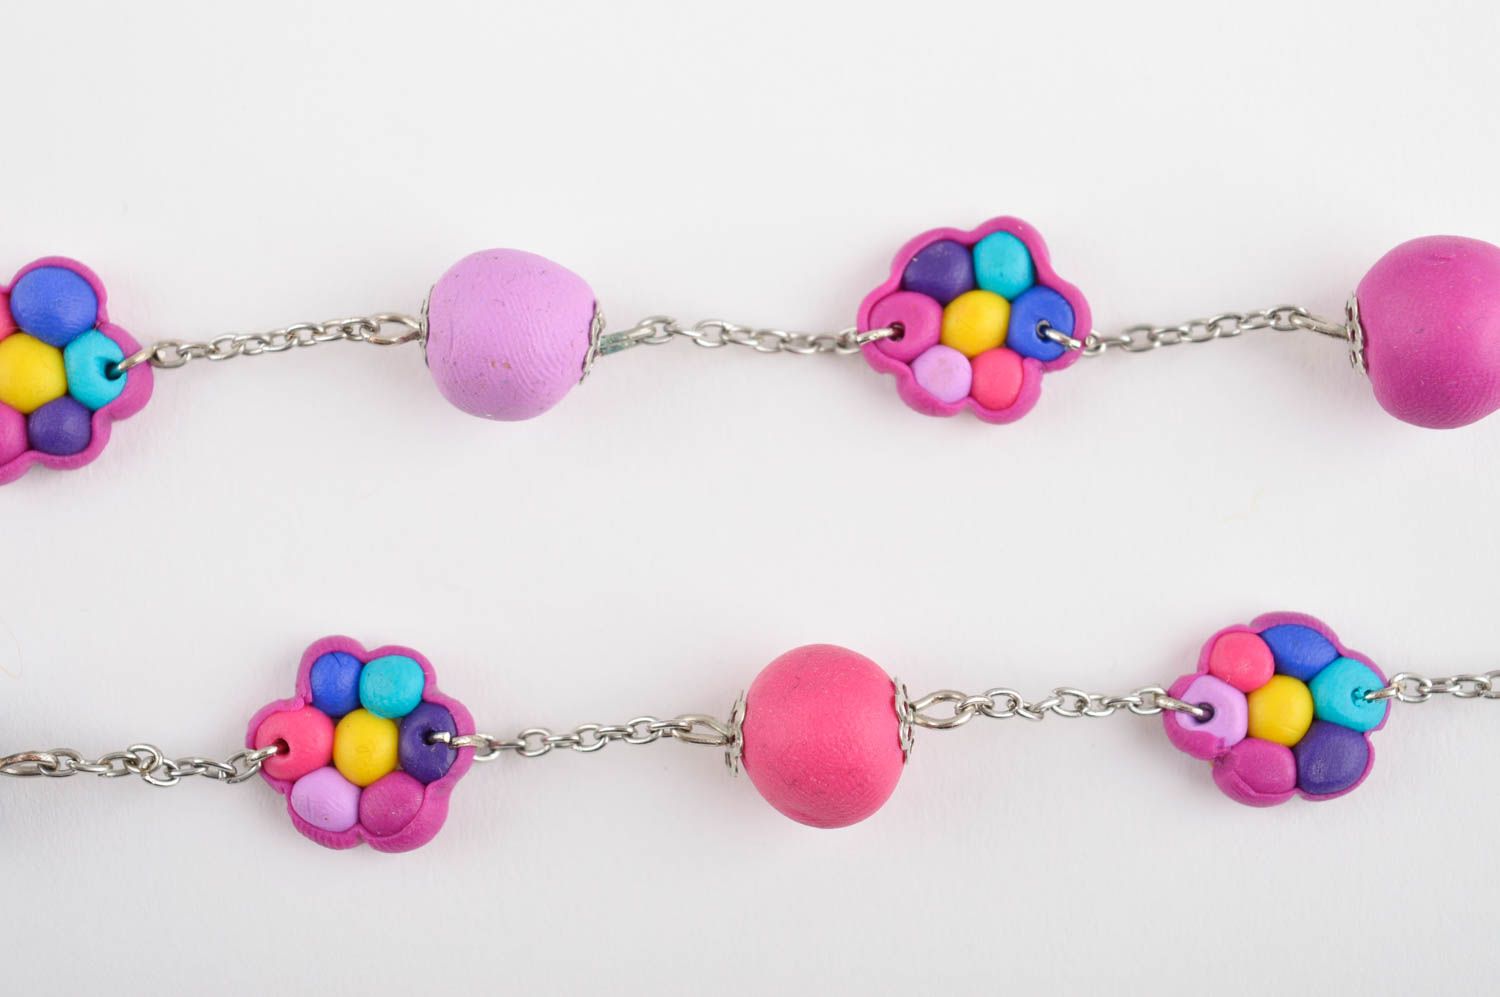 Polymer clay necklace bright necklace handmade accessories plastic jewelry photo 3